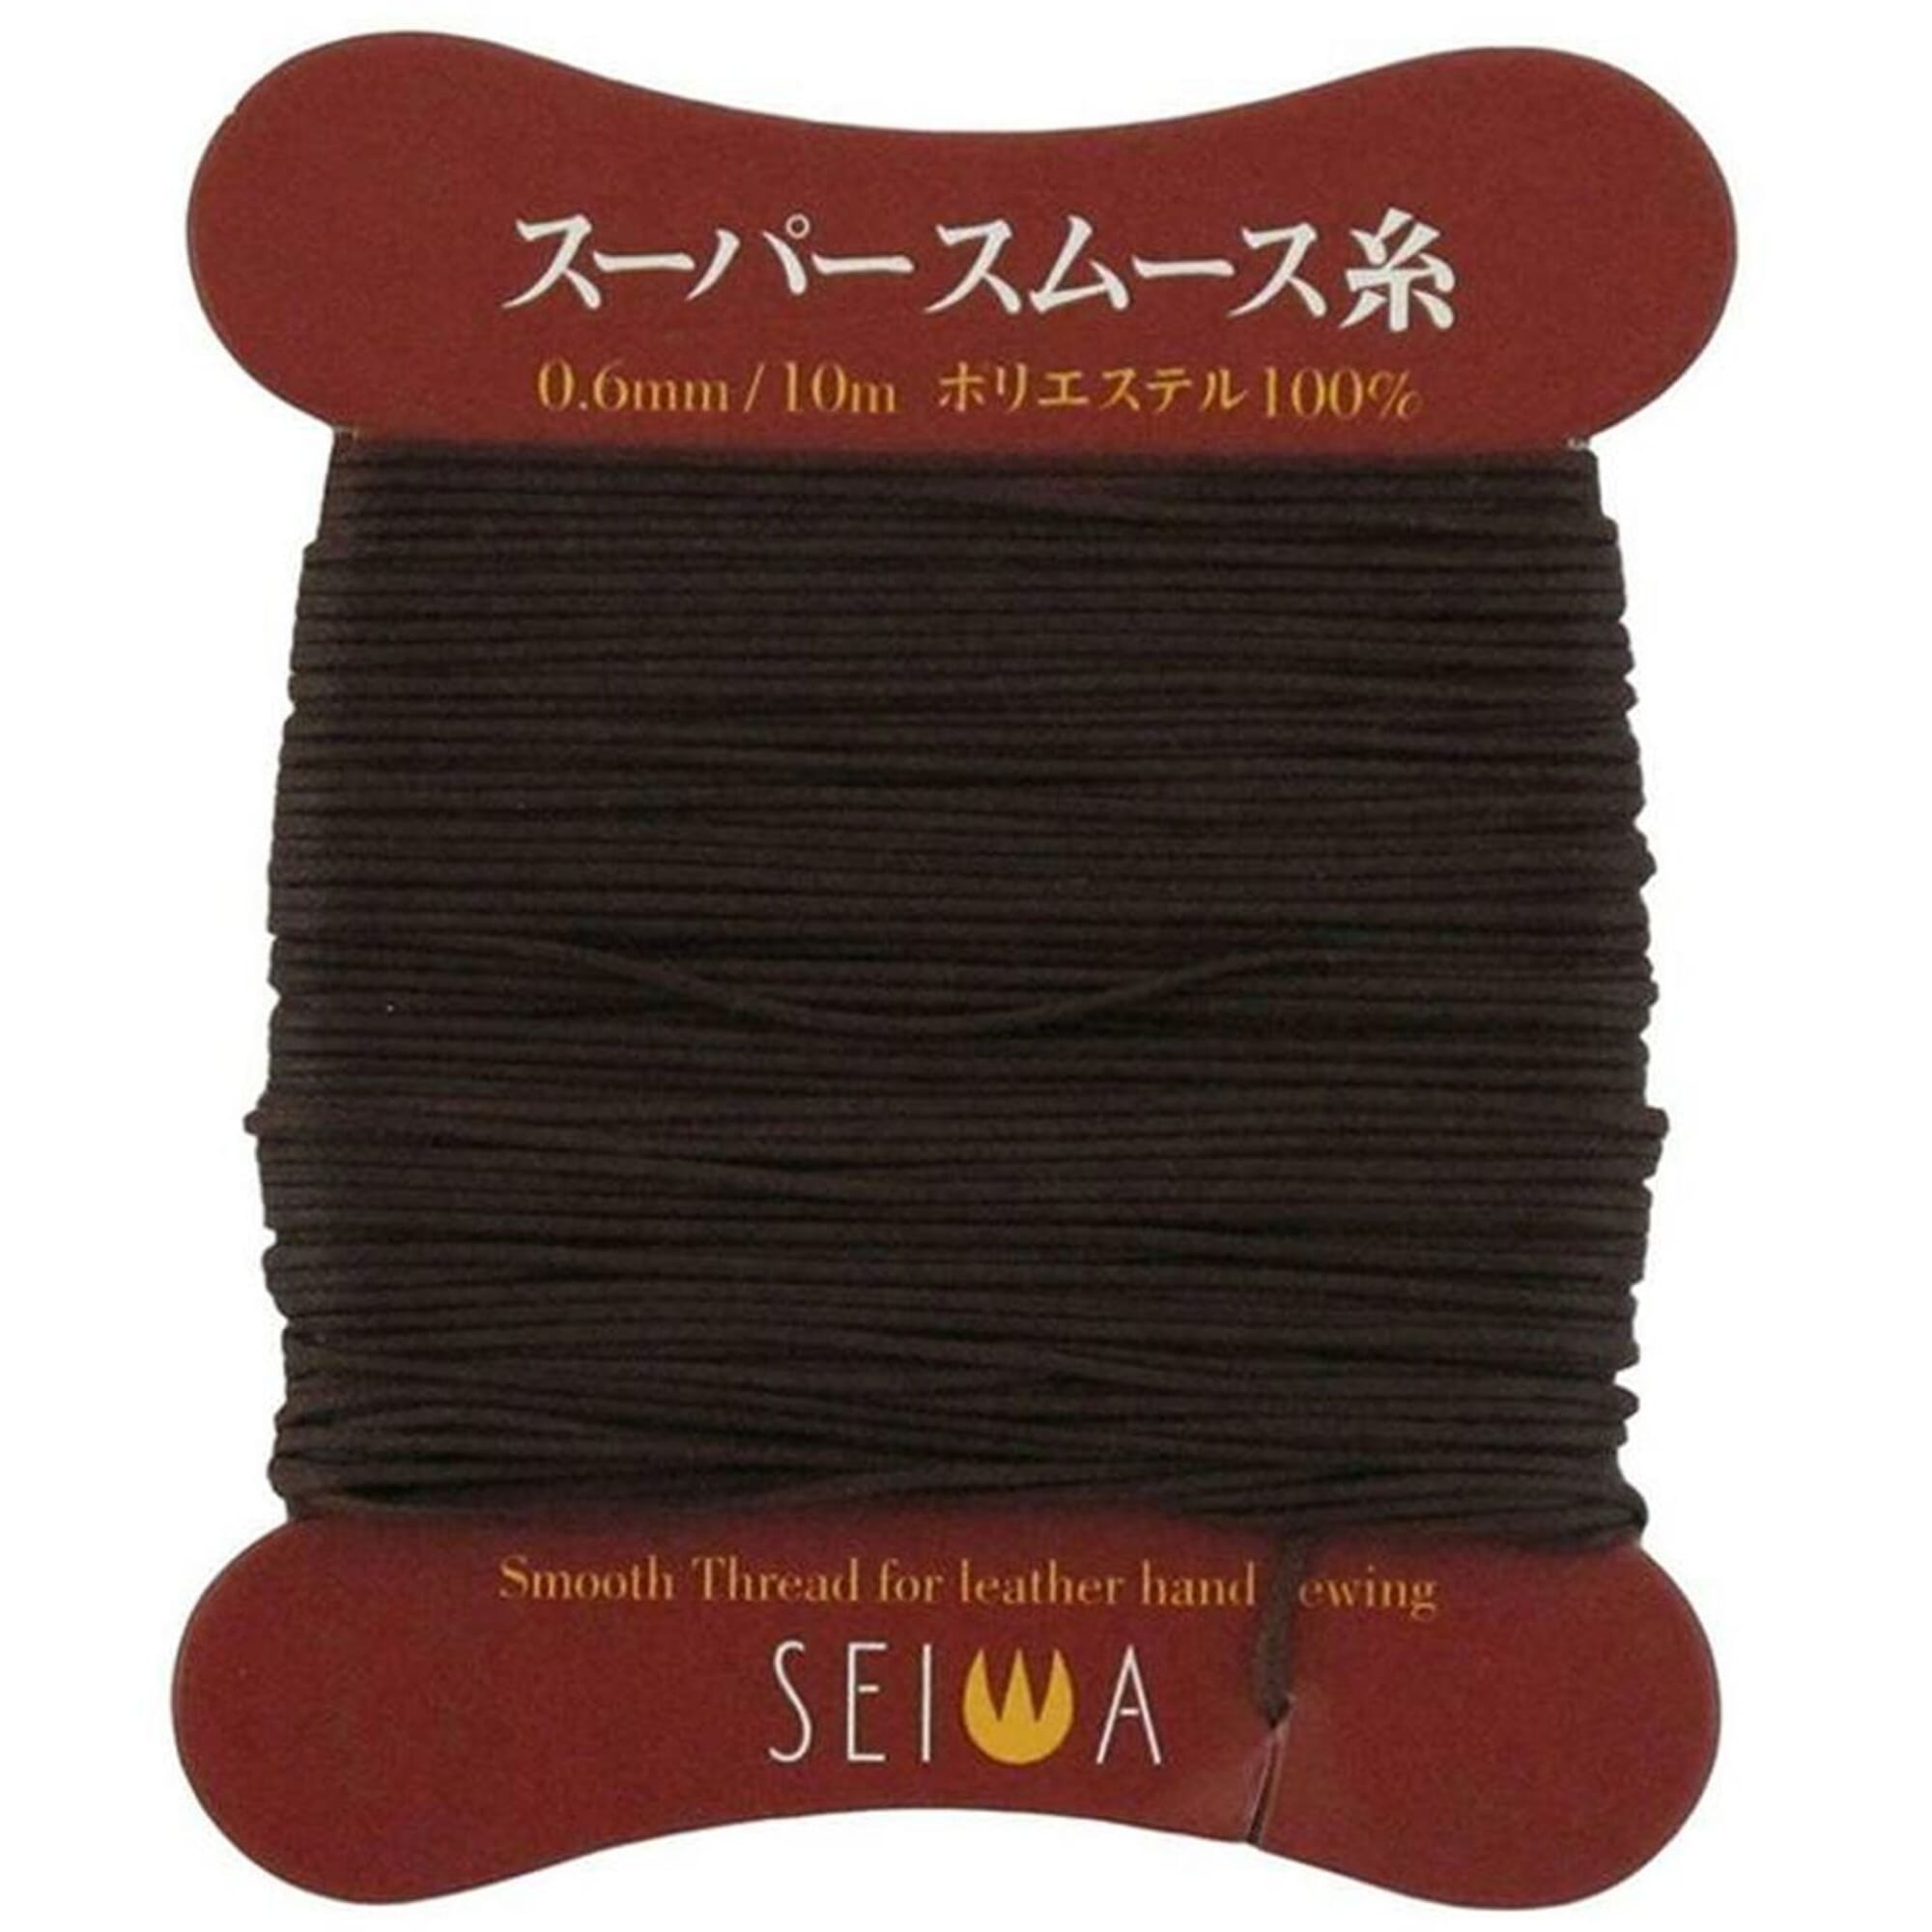 Seiwa Leathercraft Hand Sewing Tool 0.6mm Heavy-Duty Non Stretch Brown 10M Polyester Waxed Smooth Leather Thread, for Stitching Leatherwork